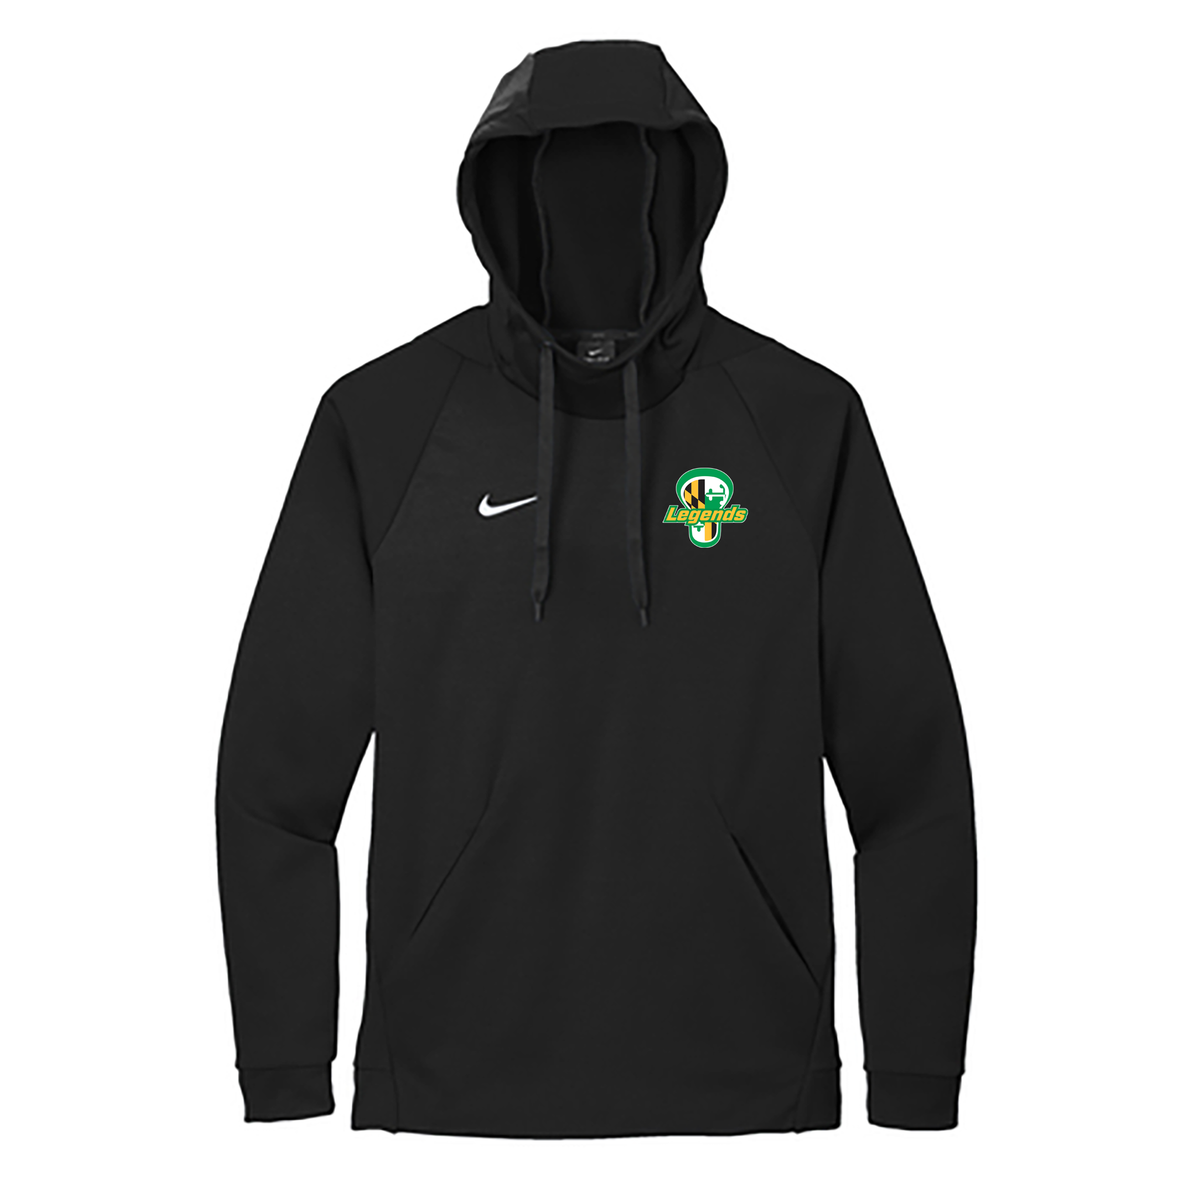 Legends Lacrosse Nike Therma-FIT Embroidered Hoodie